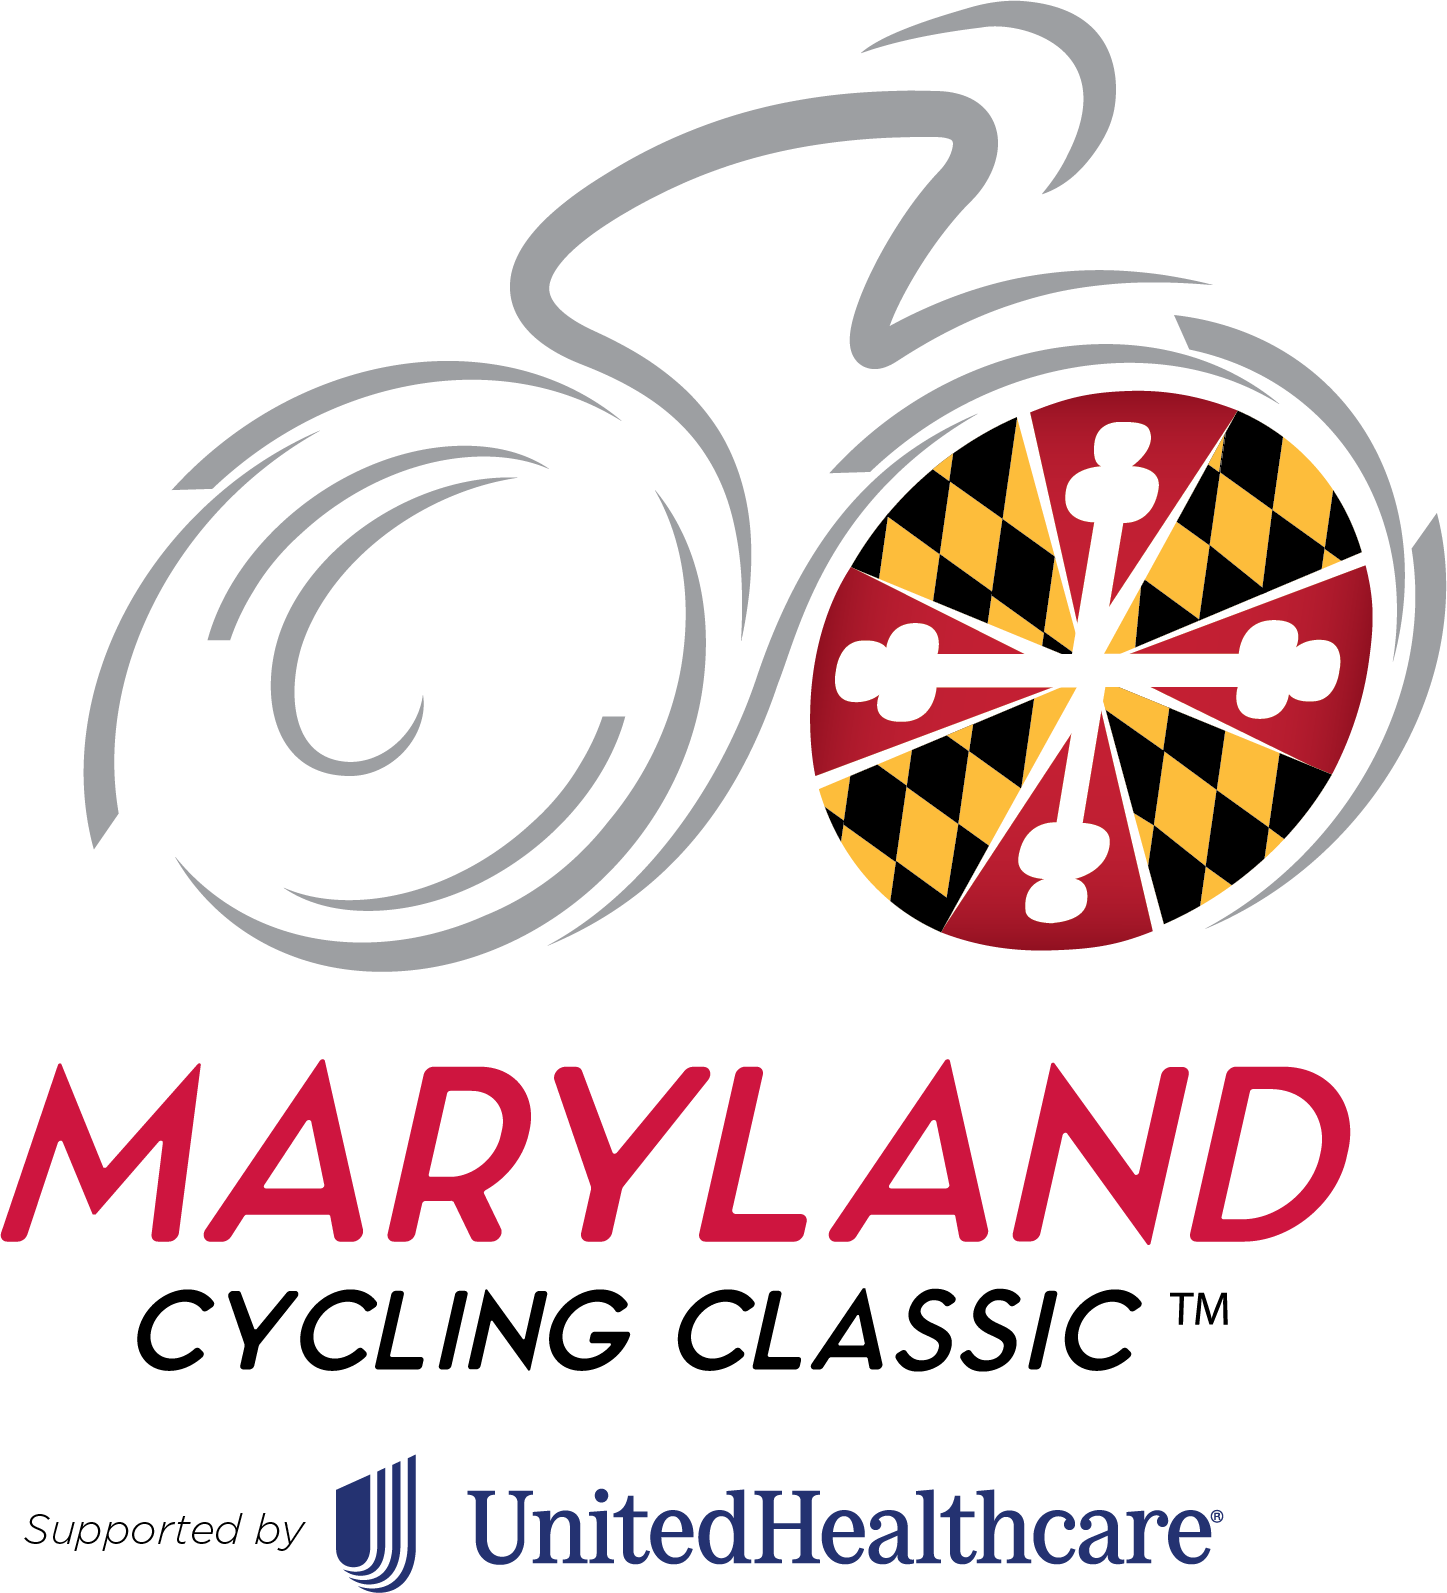 maryland cycling classic